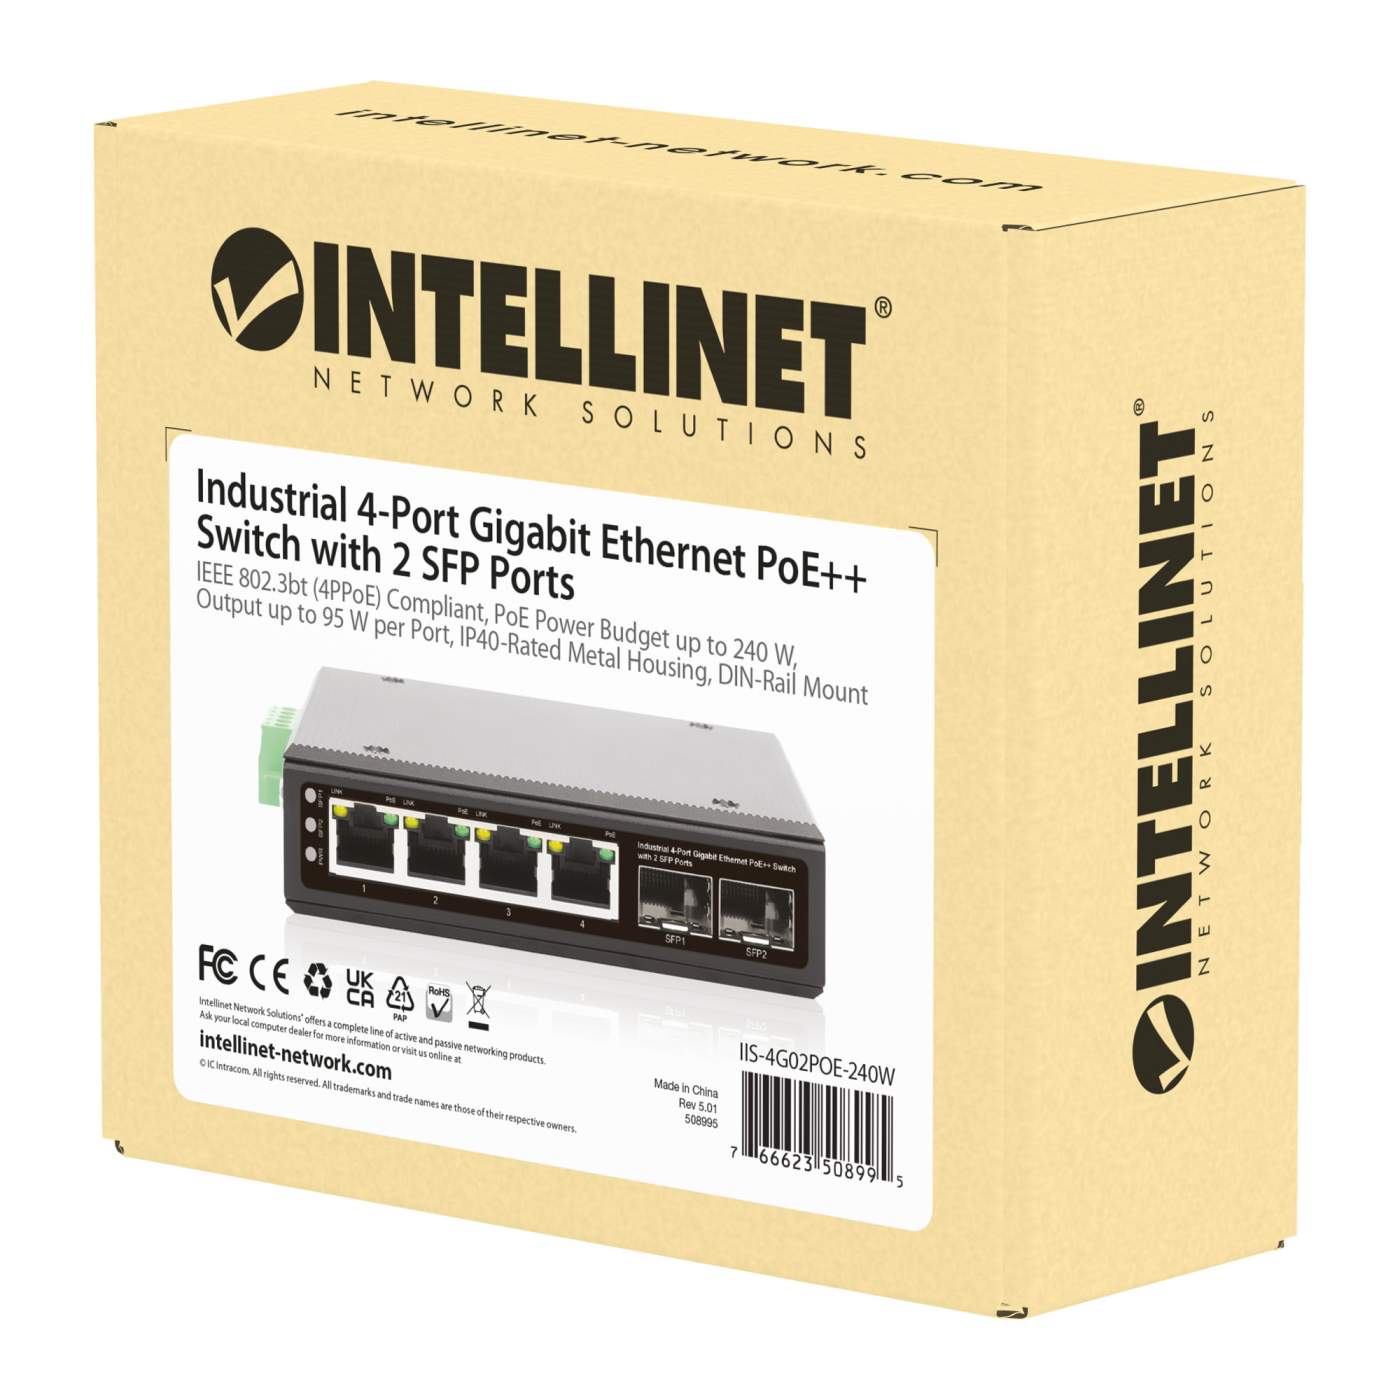 Industrial 4-Port Gigabit Ethernet PoE++ Switch with 2 SFP Ports